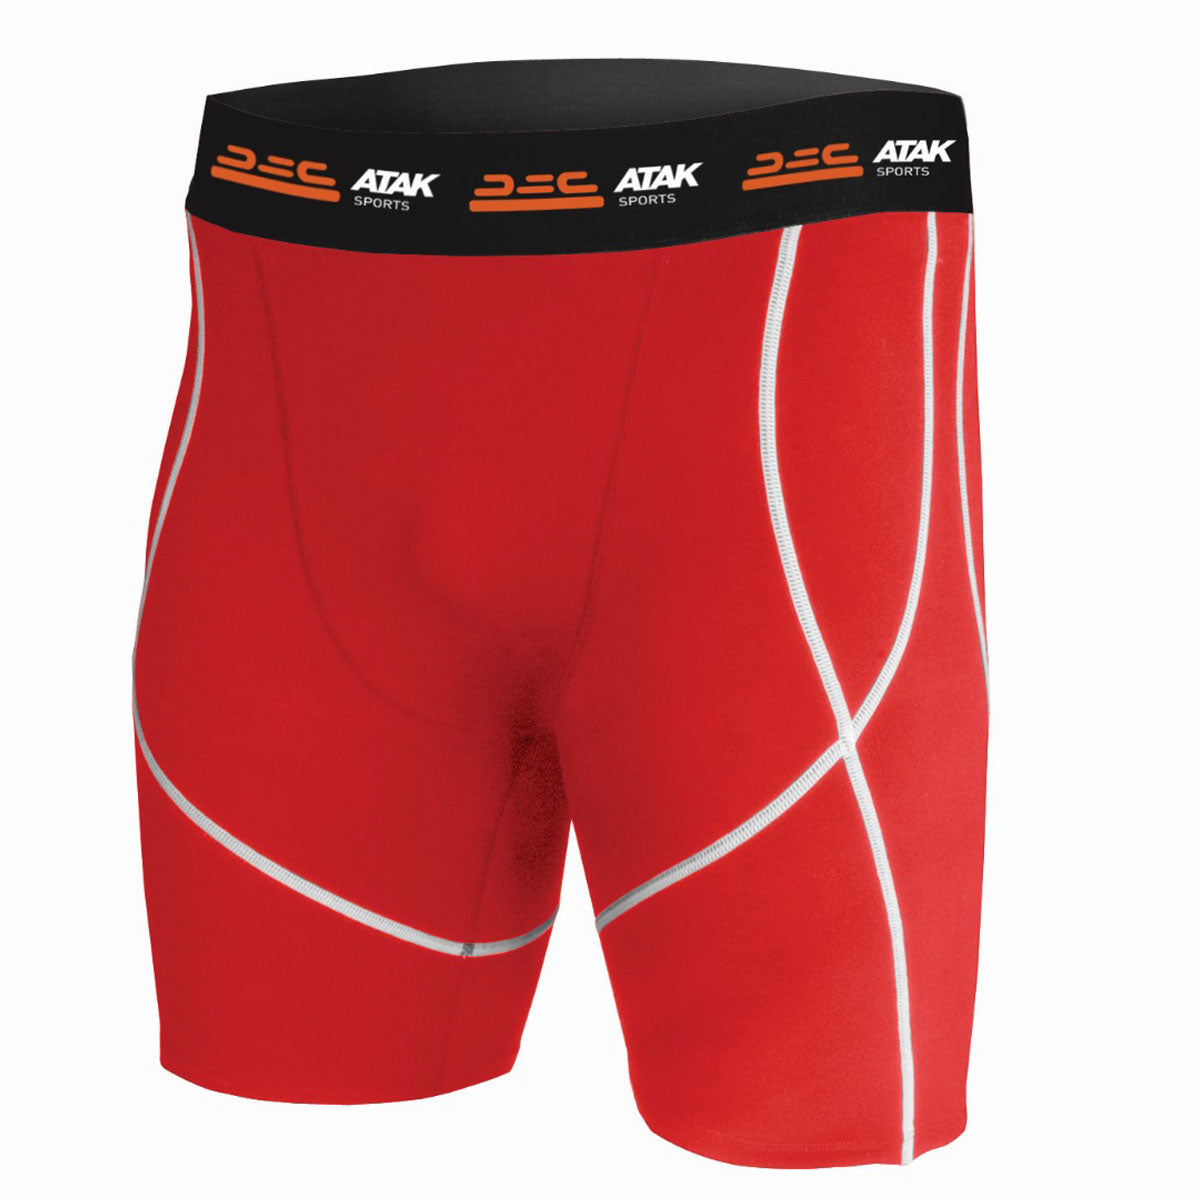 Atak Compression Shorts - Youth - Red